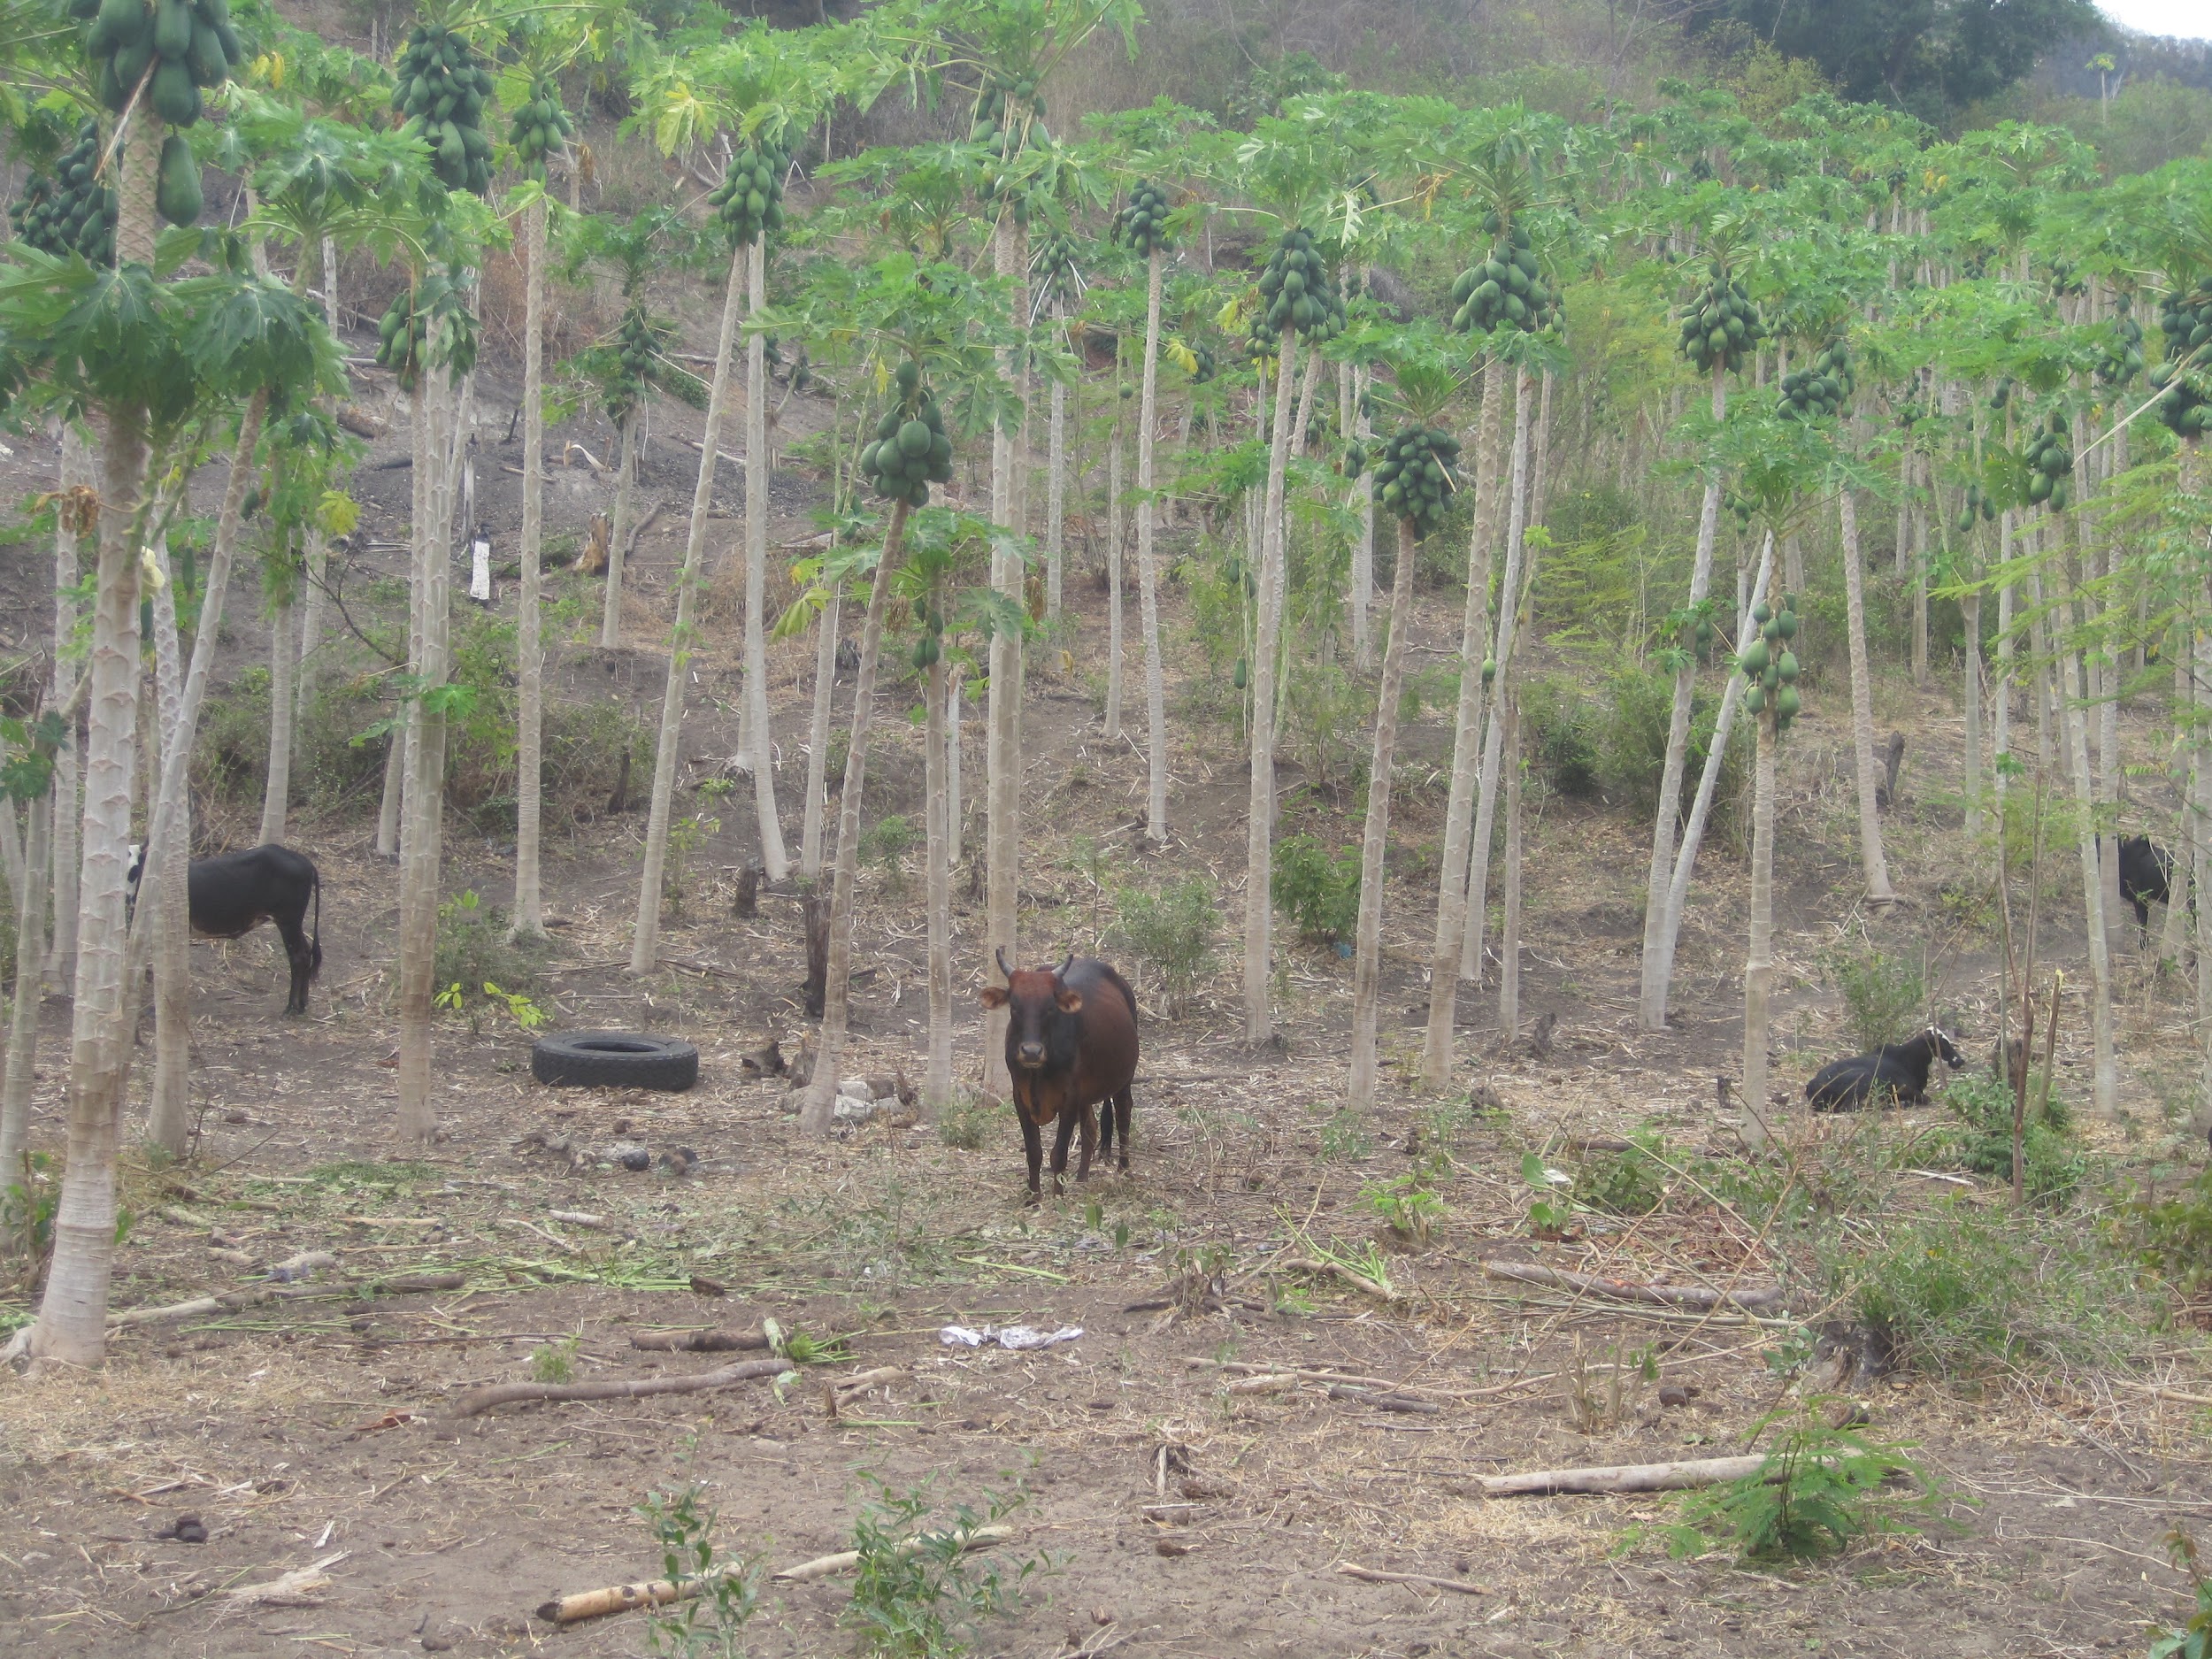 Cows stand in a field of papaya trees with sparse foreground.